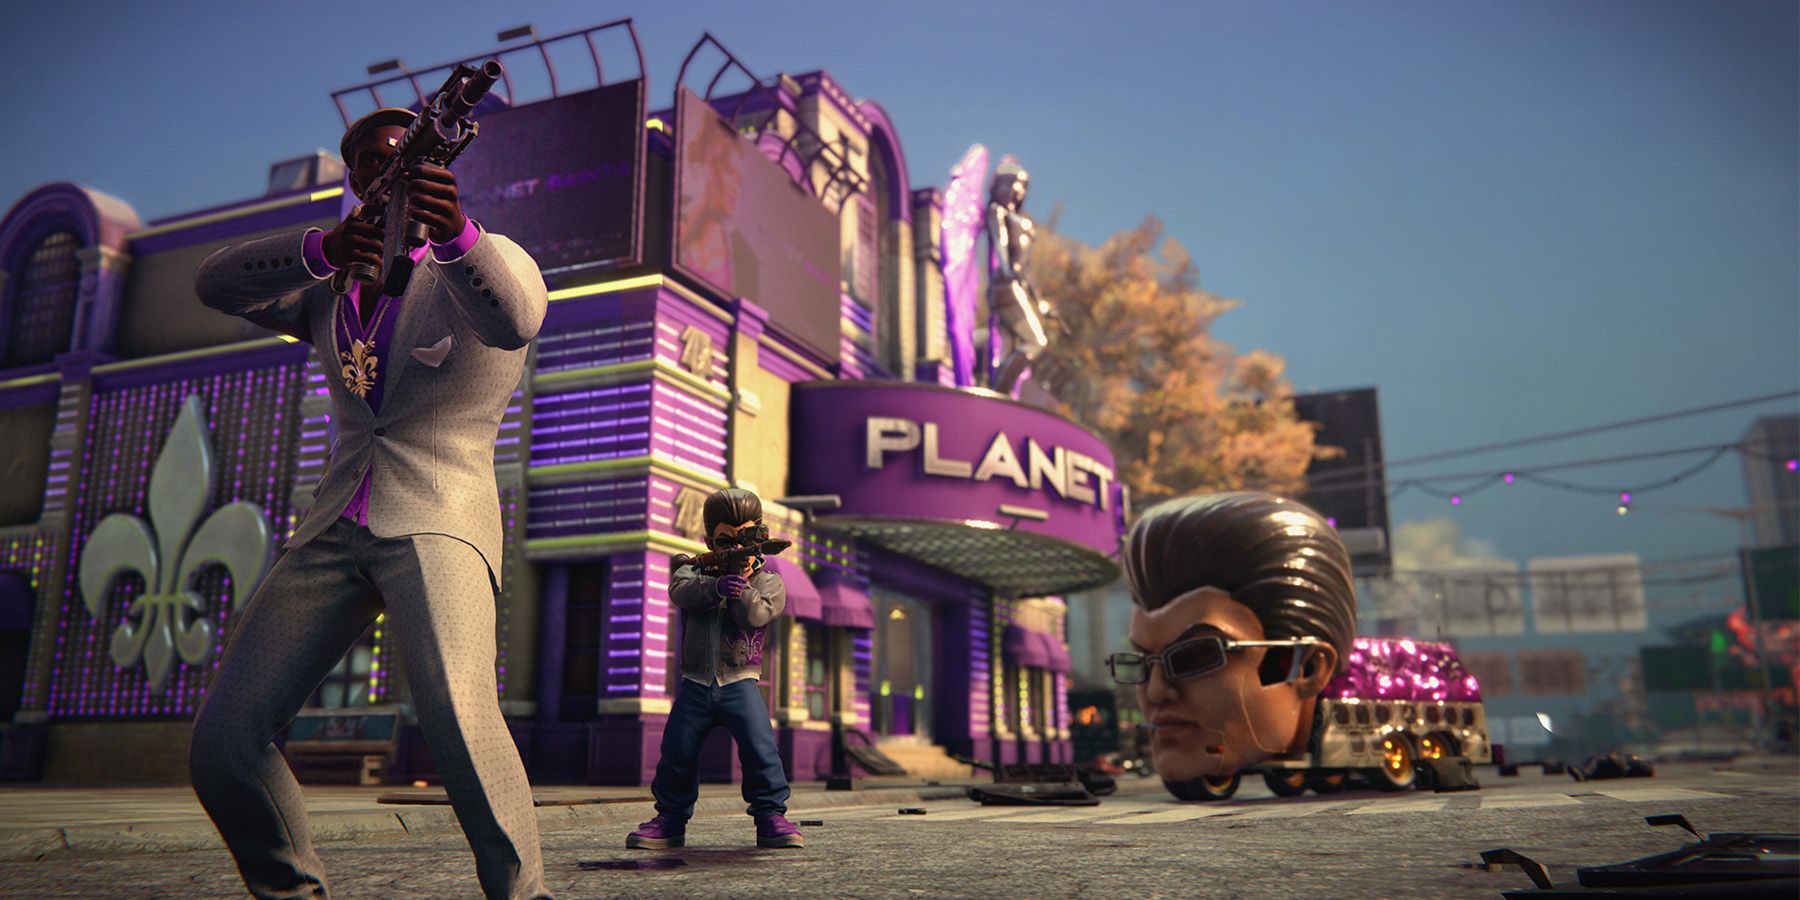 Two characters aiming weapons on a street in Saints Row: The Third